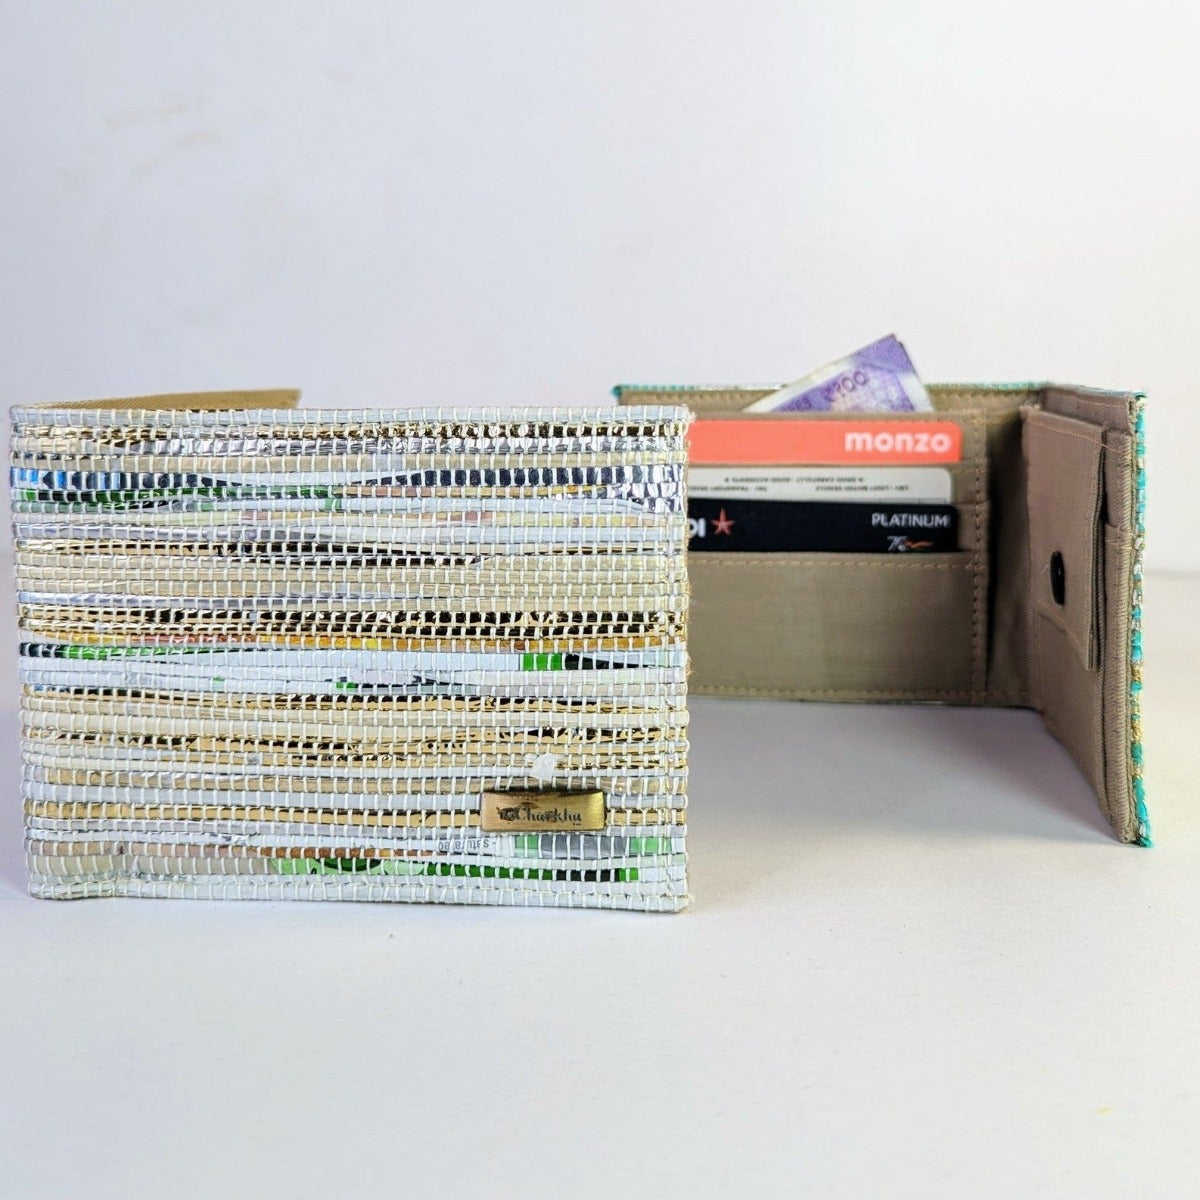 recharkha upcycled handwoven Wallet handmade from waste plastic bags gift, packaging Amazon wrappers and cassette tapes